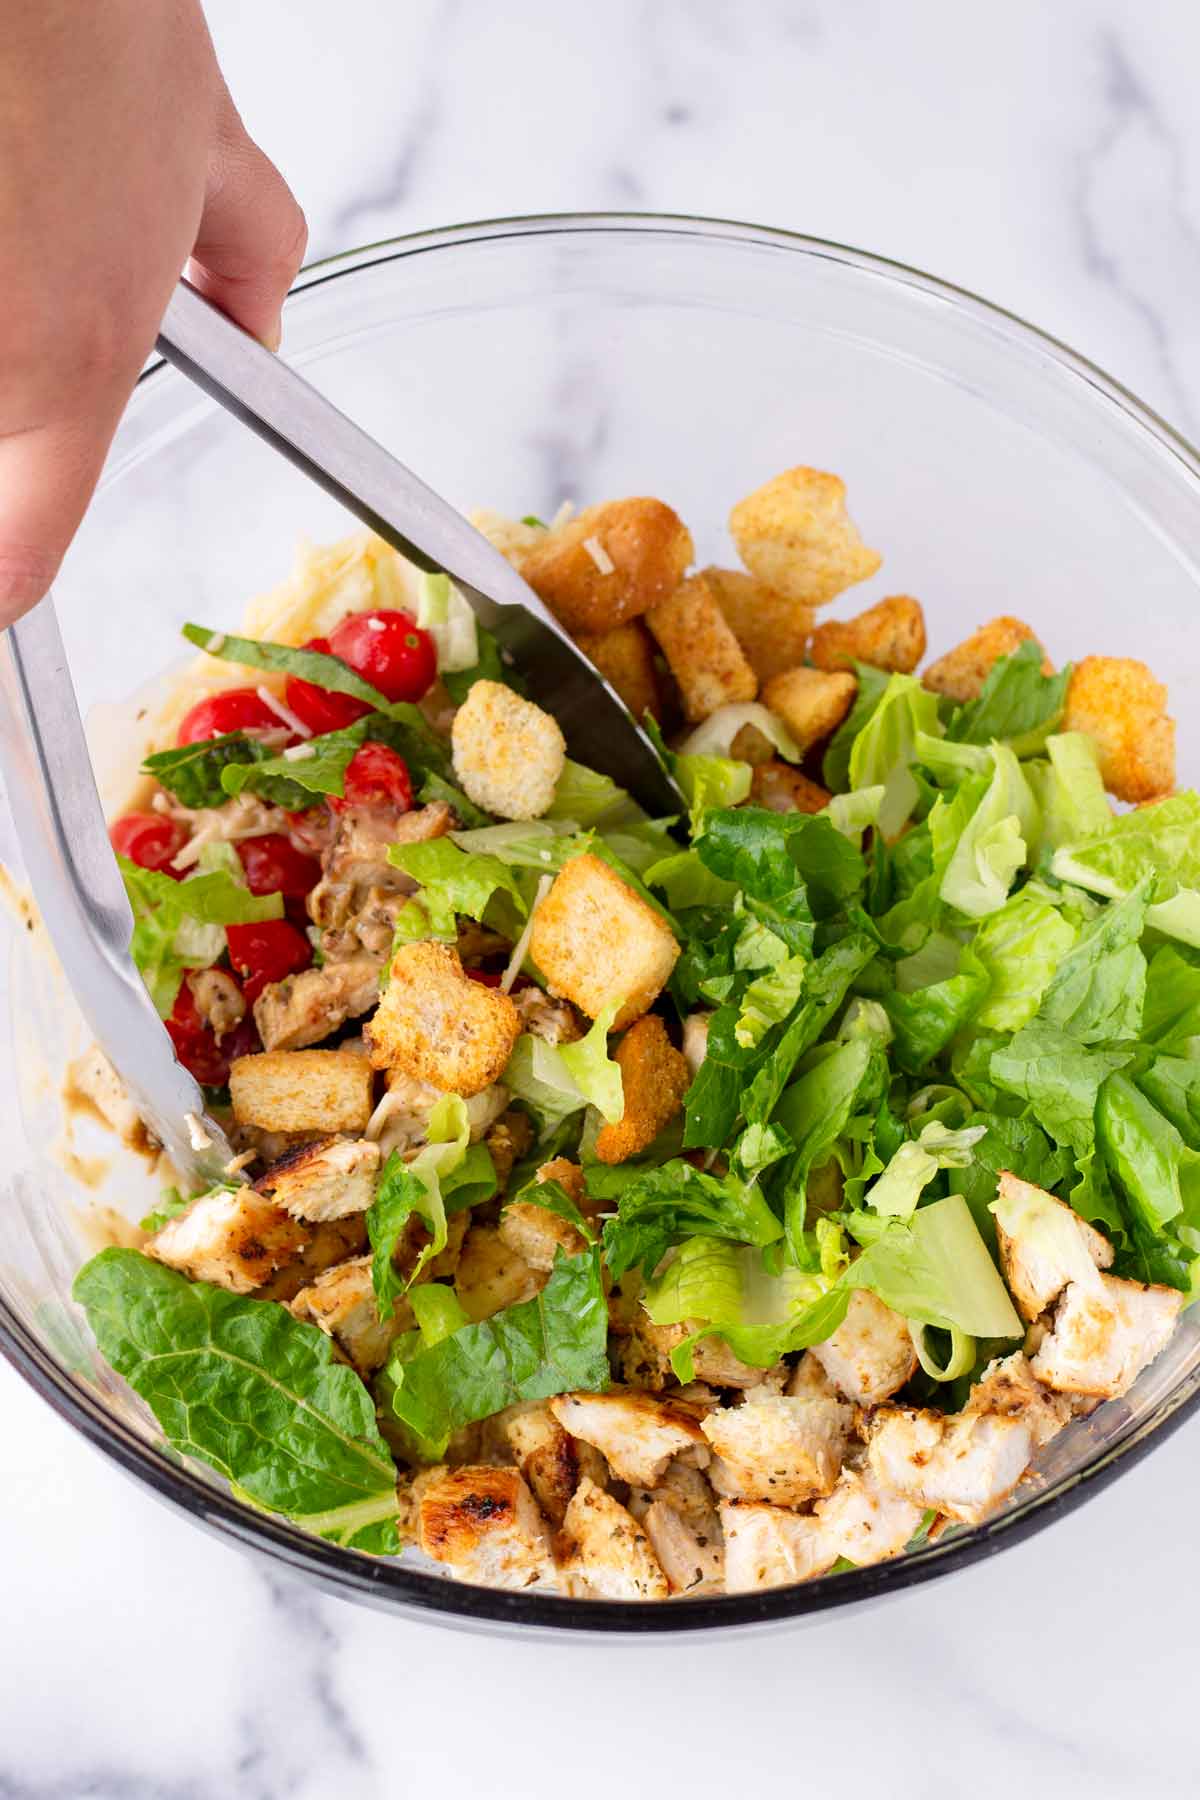 tossing salad ingredients in a bowl using tongs